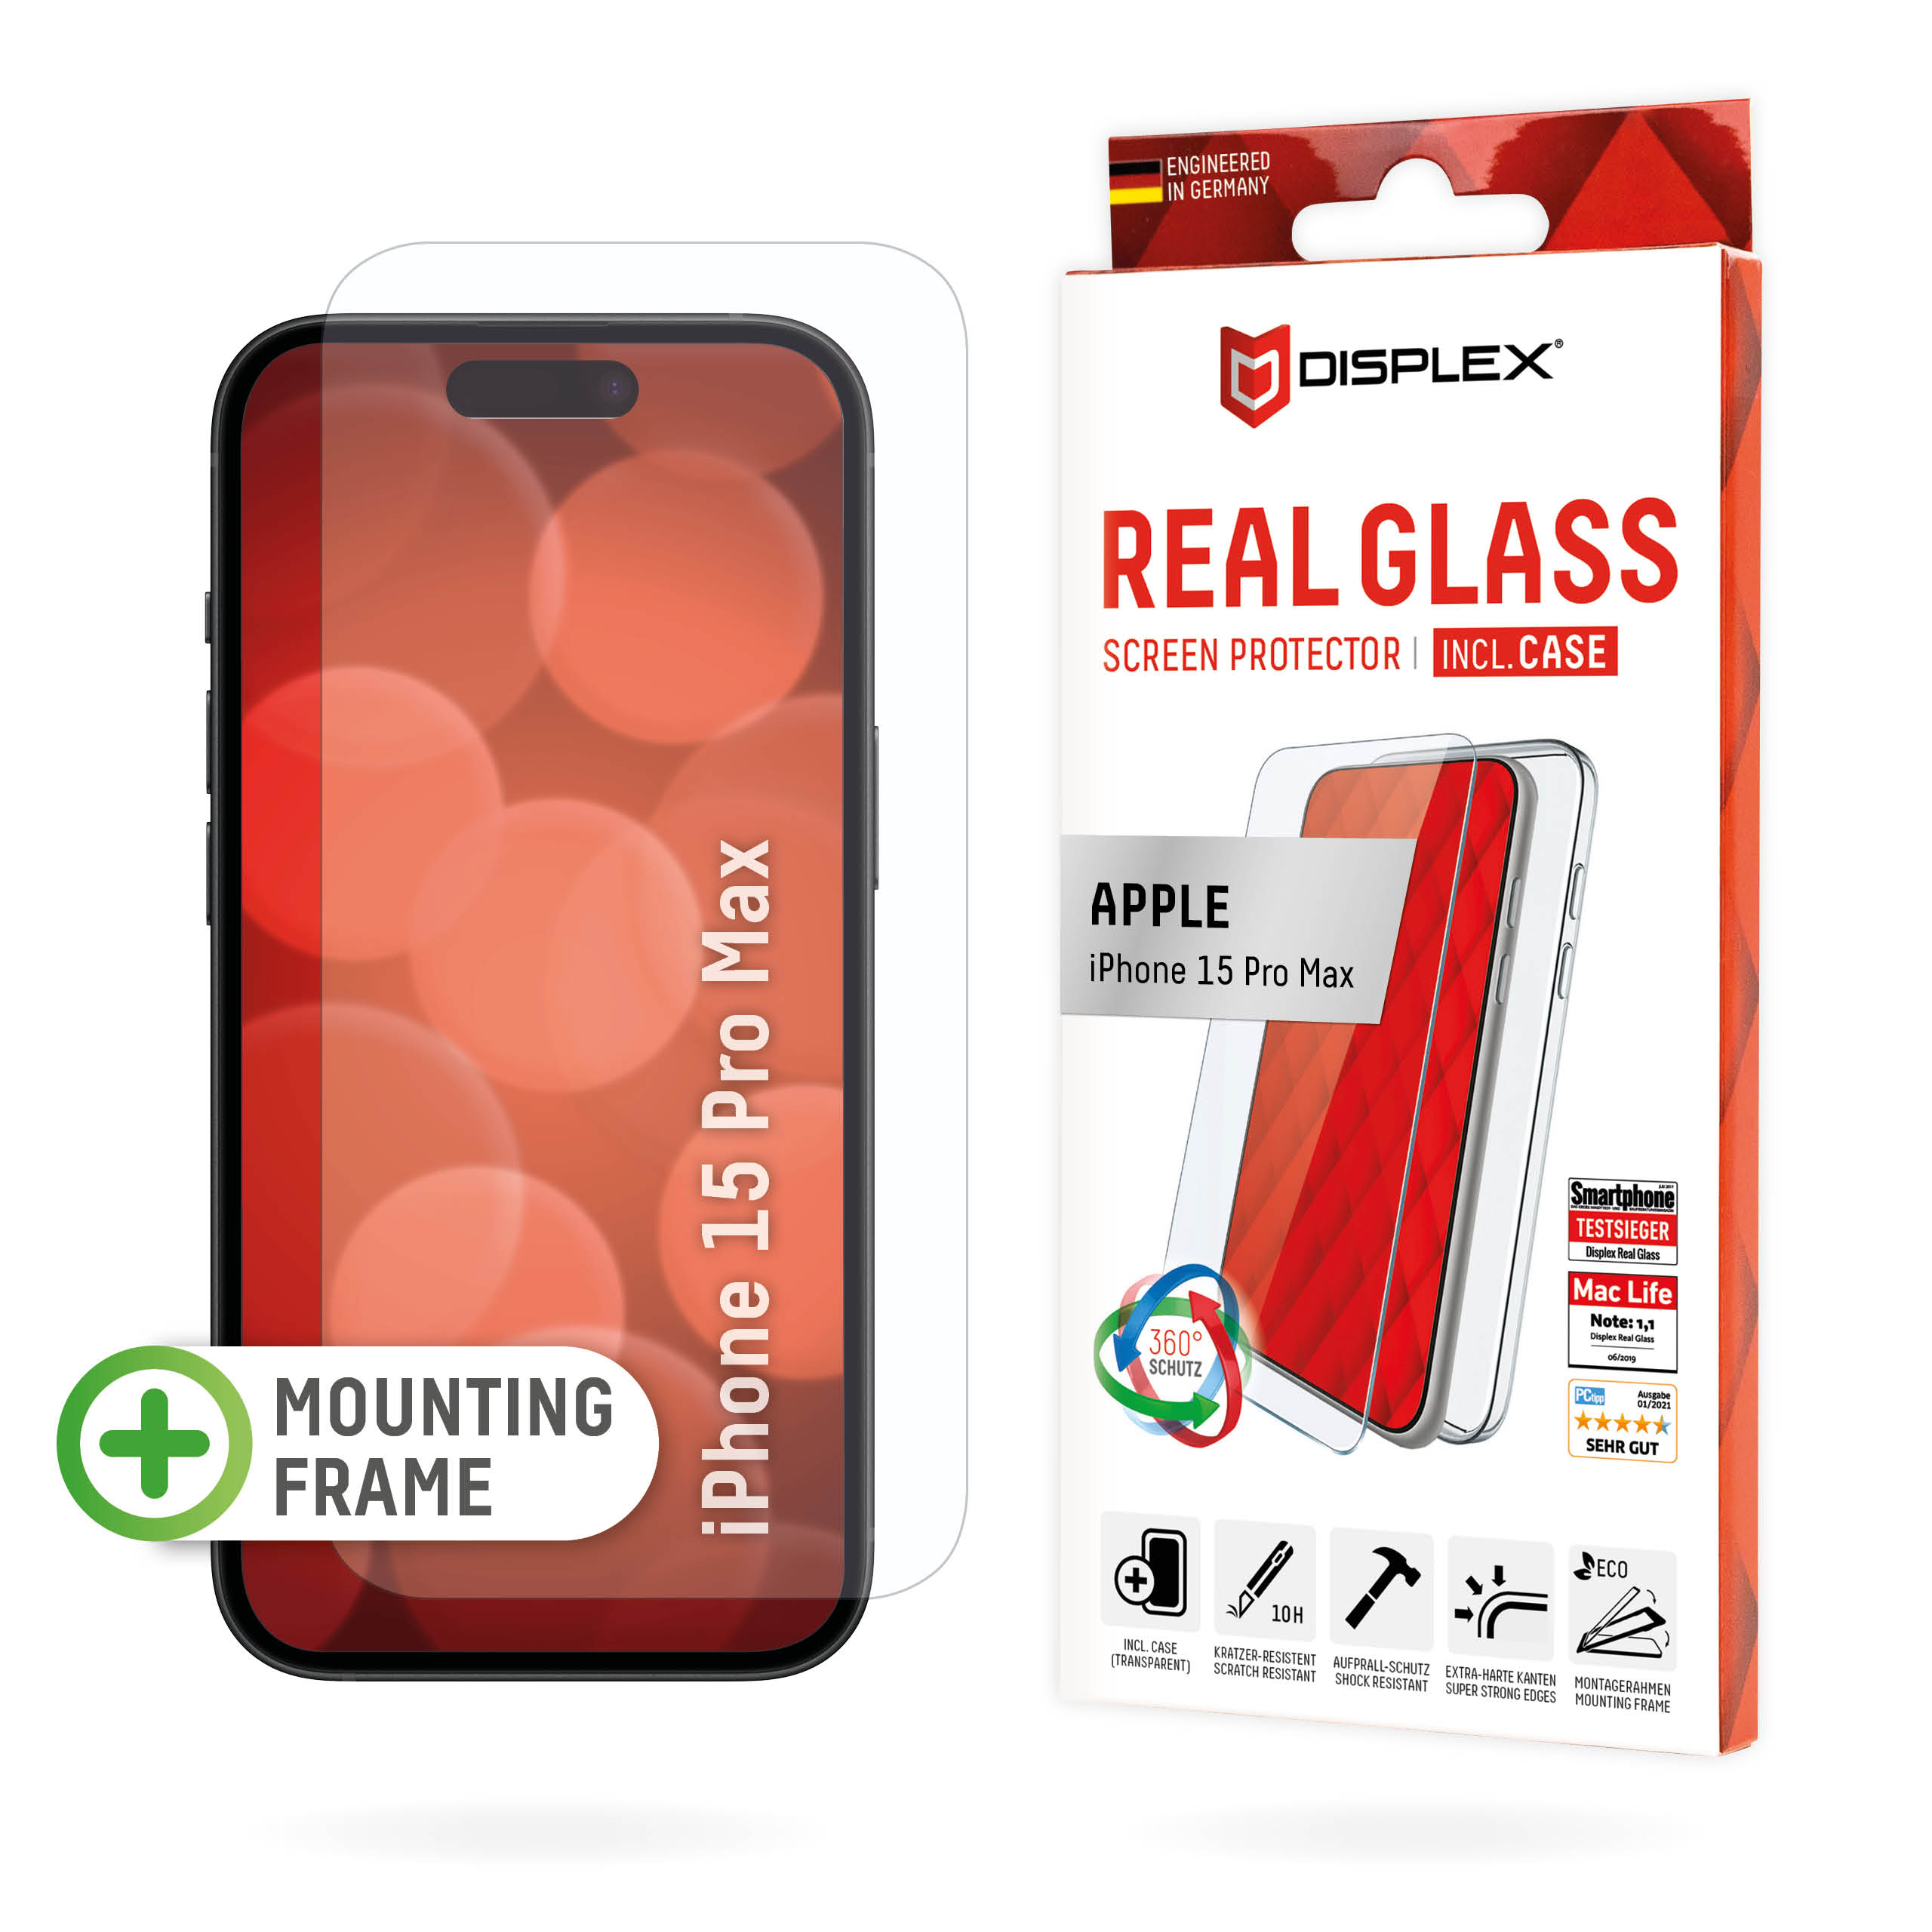 01849-APPLE-iPhone-15-Pro-Max-Real-Glass-Case-2D_EN1HbthE5BNFlzf